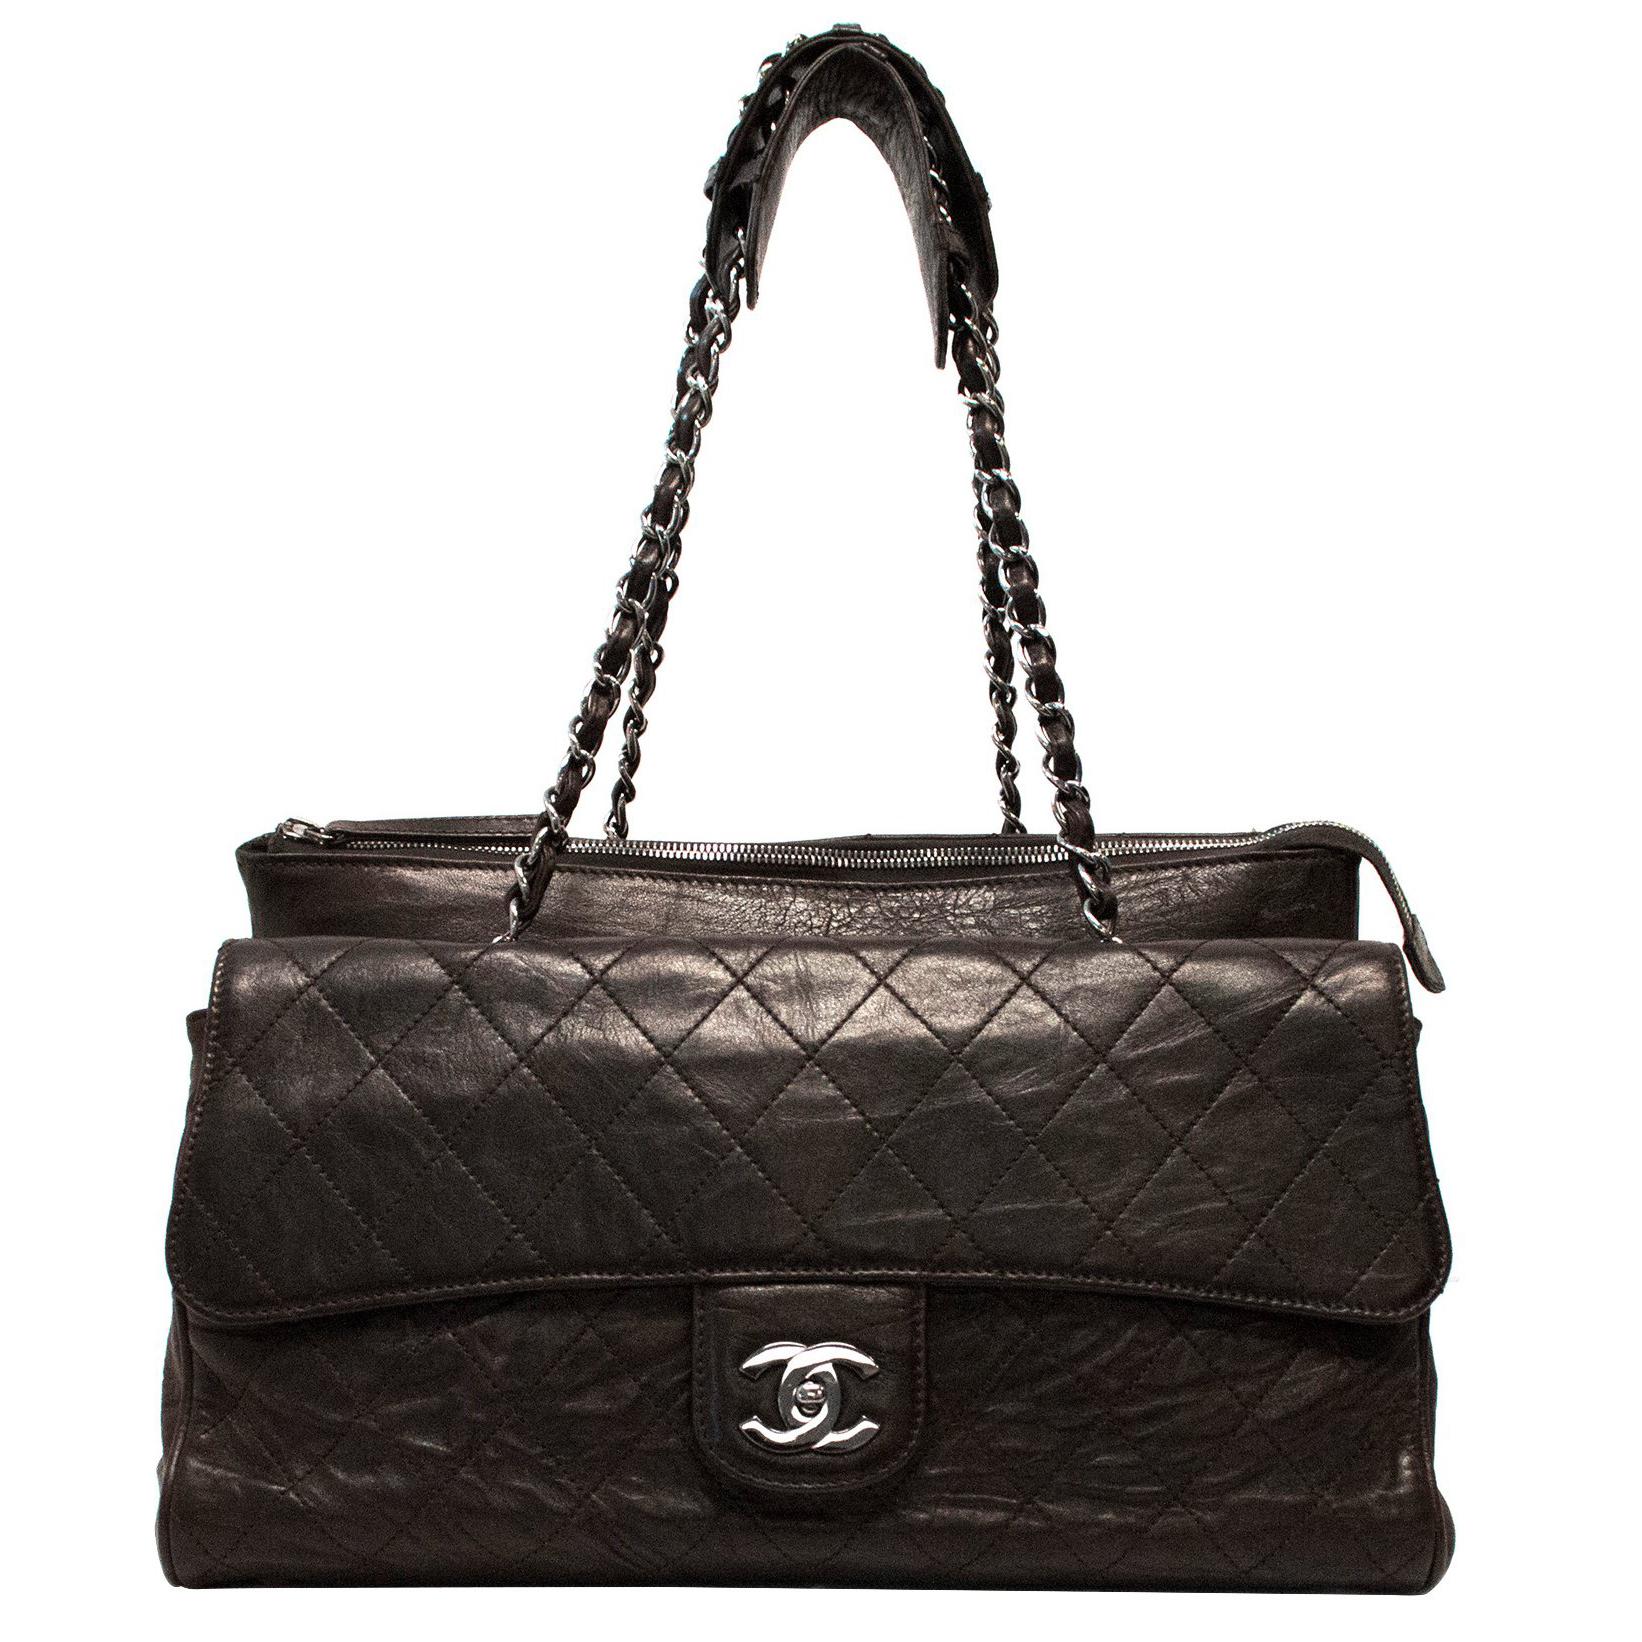 Chanel Dark Brown Quilted Leather Gladstone Bag